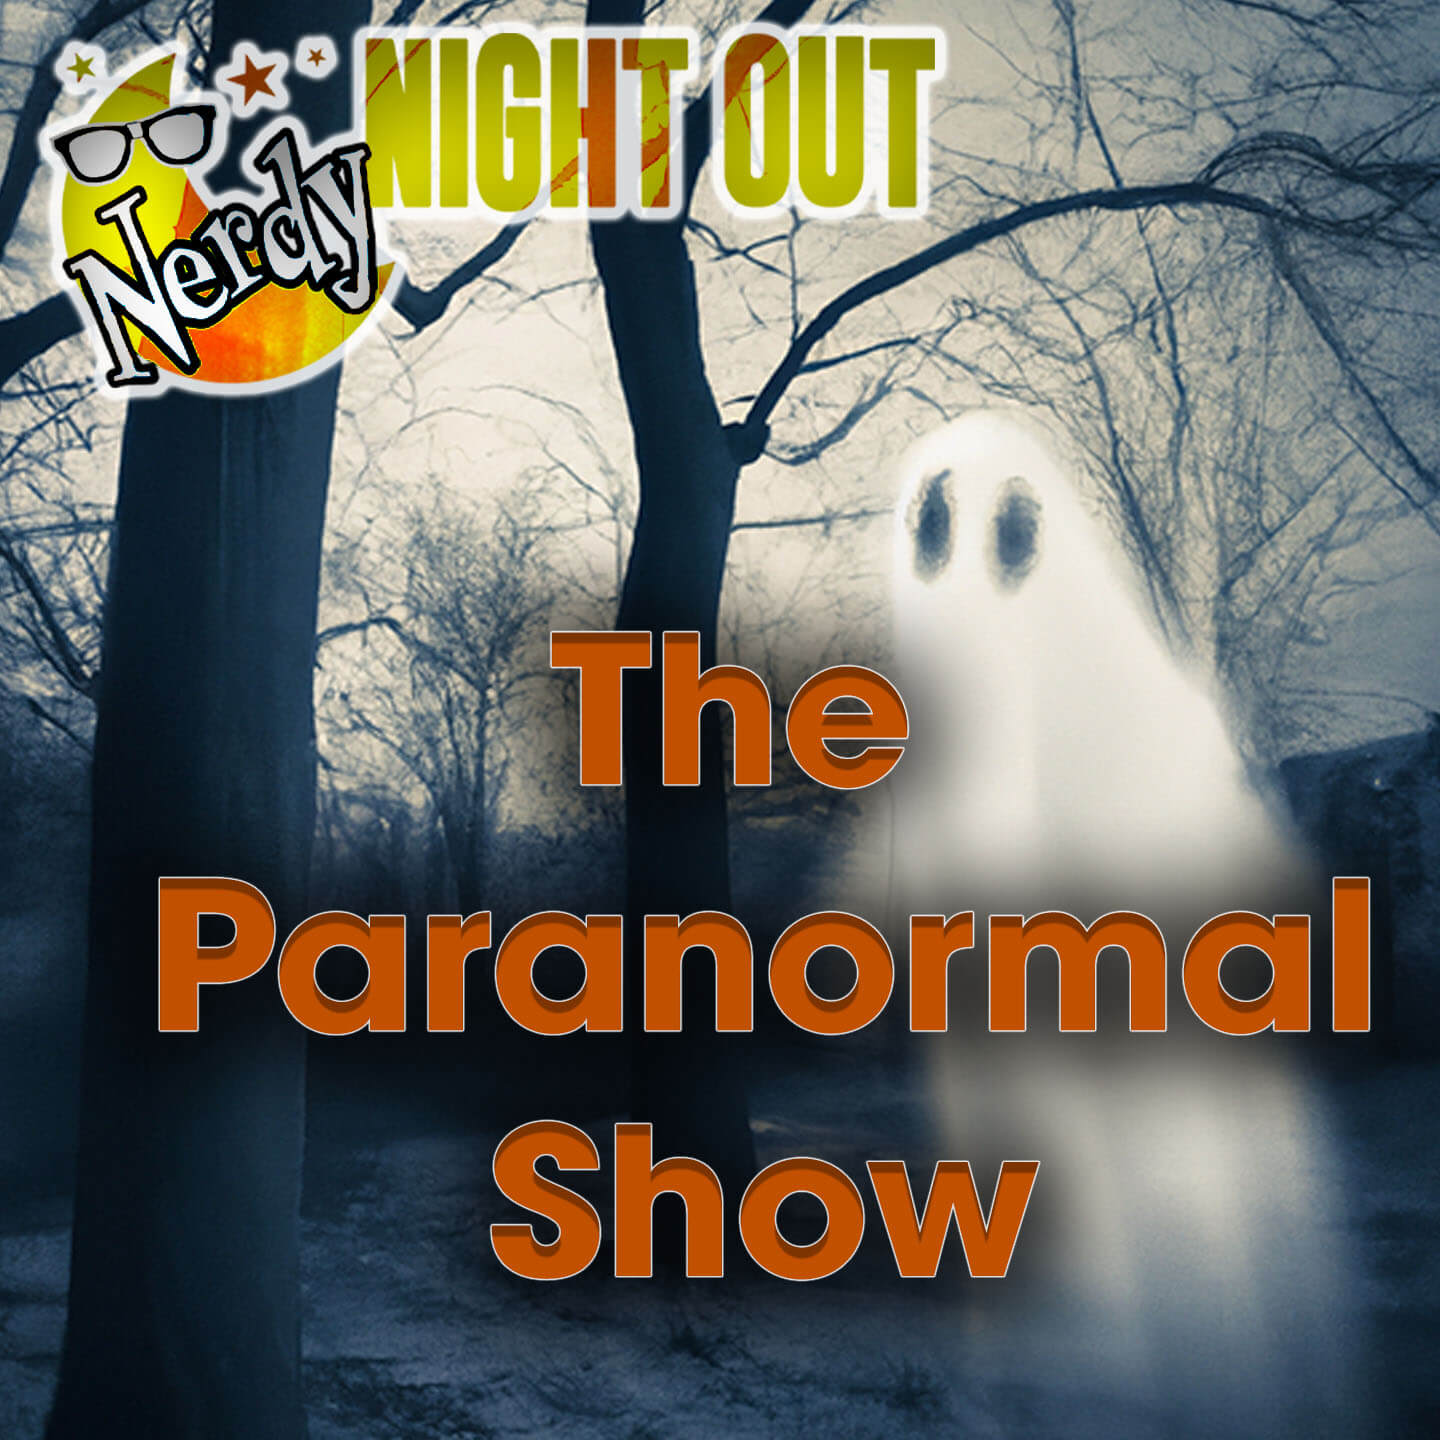 Nerdy Night Out: The Paranormal Show